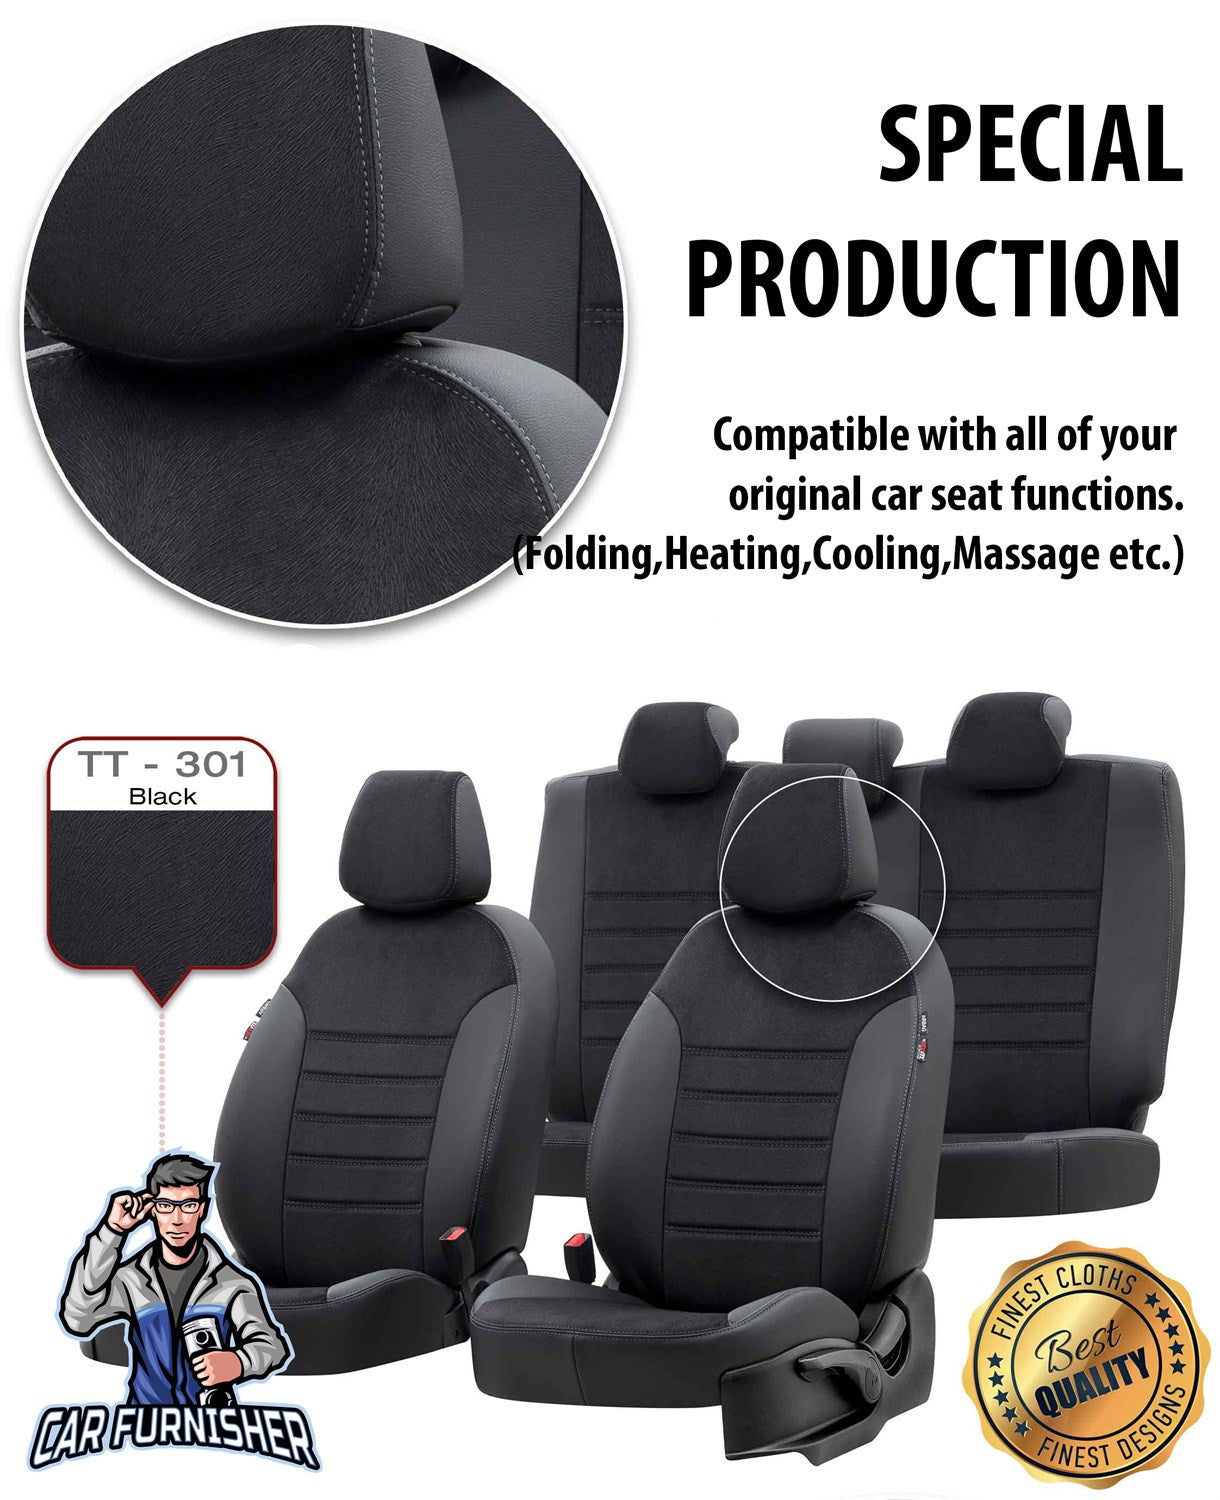 Renault Trafic Seat Covers London Foal Feather Design Smoked Black Leather & Foal Feather